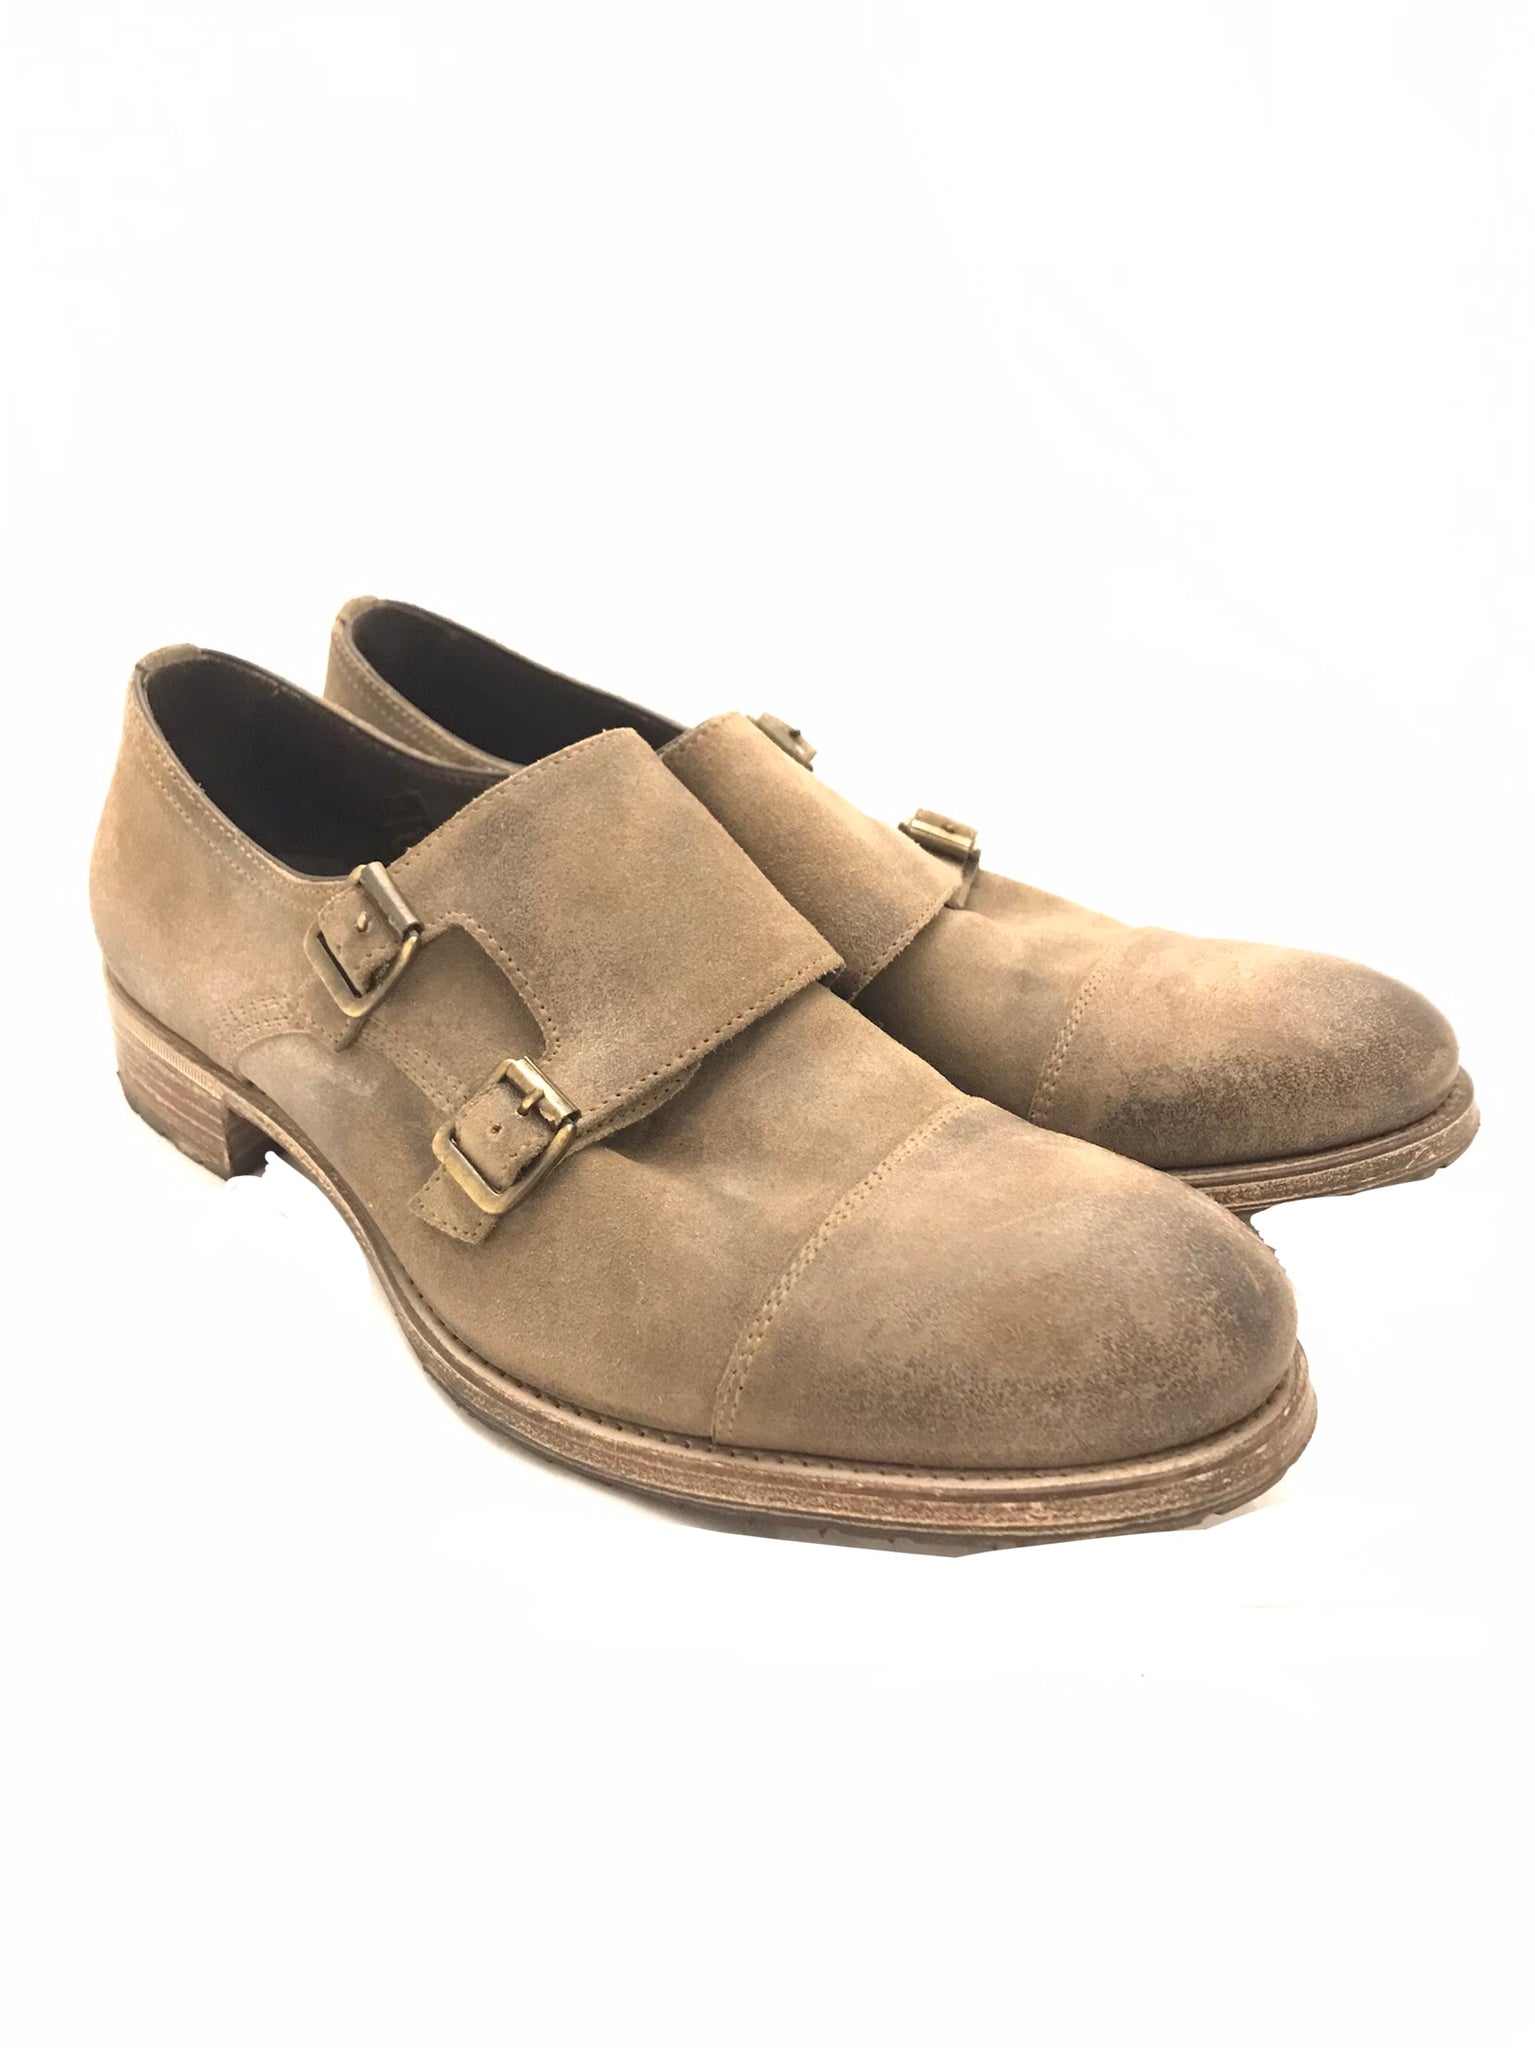 Isabella's Wardrobe n.d.c. 'Sunday Buckle' Suede Shoes.